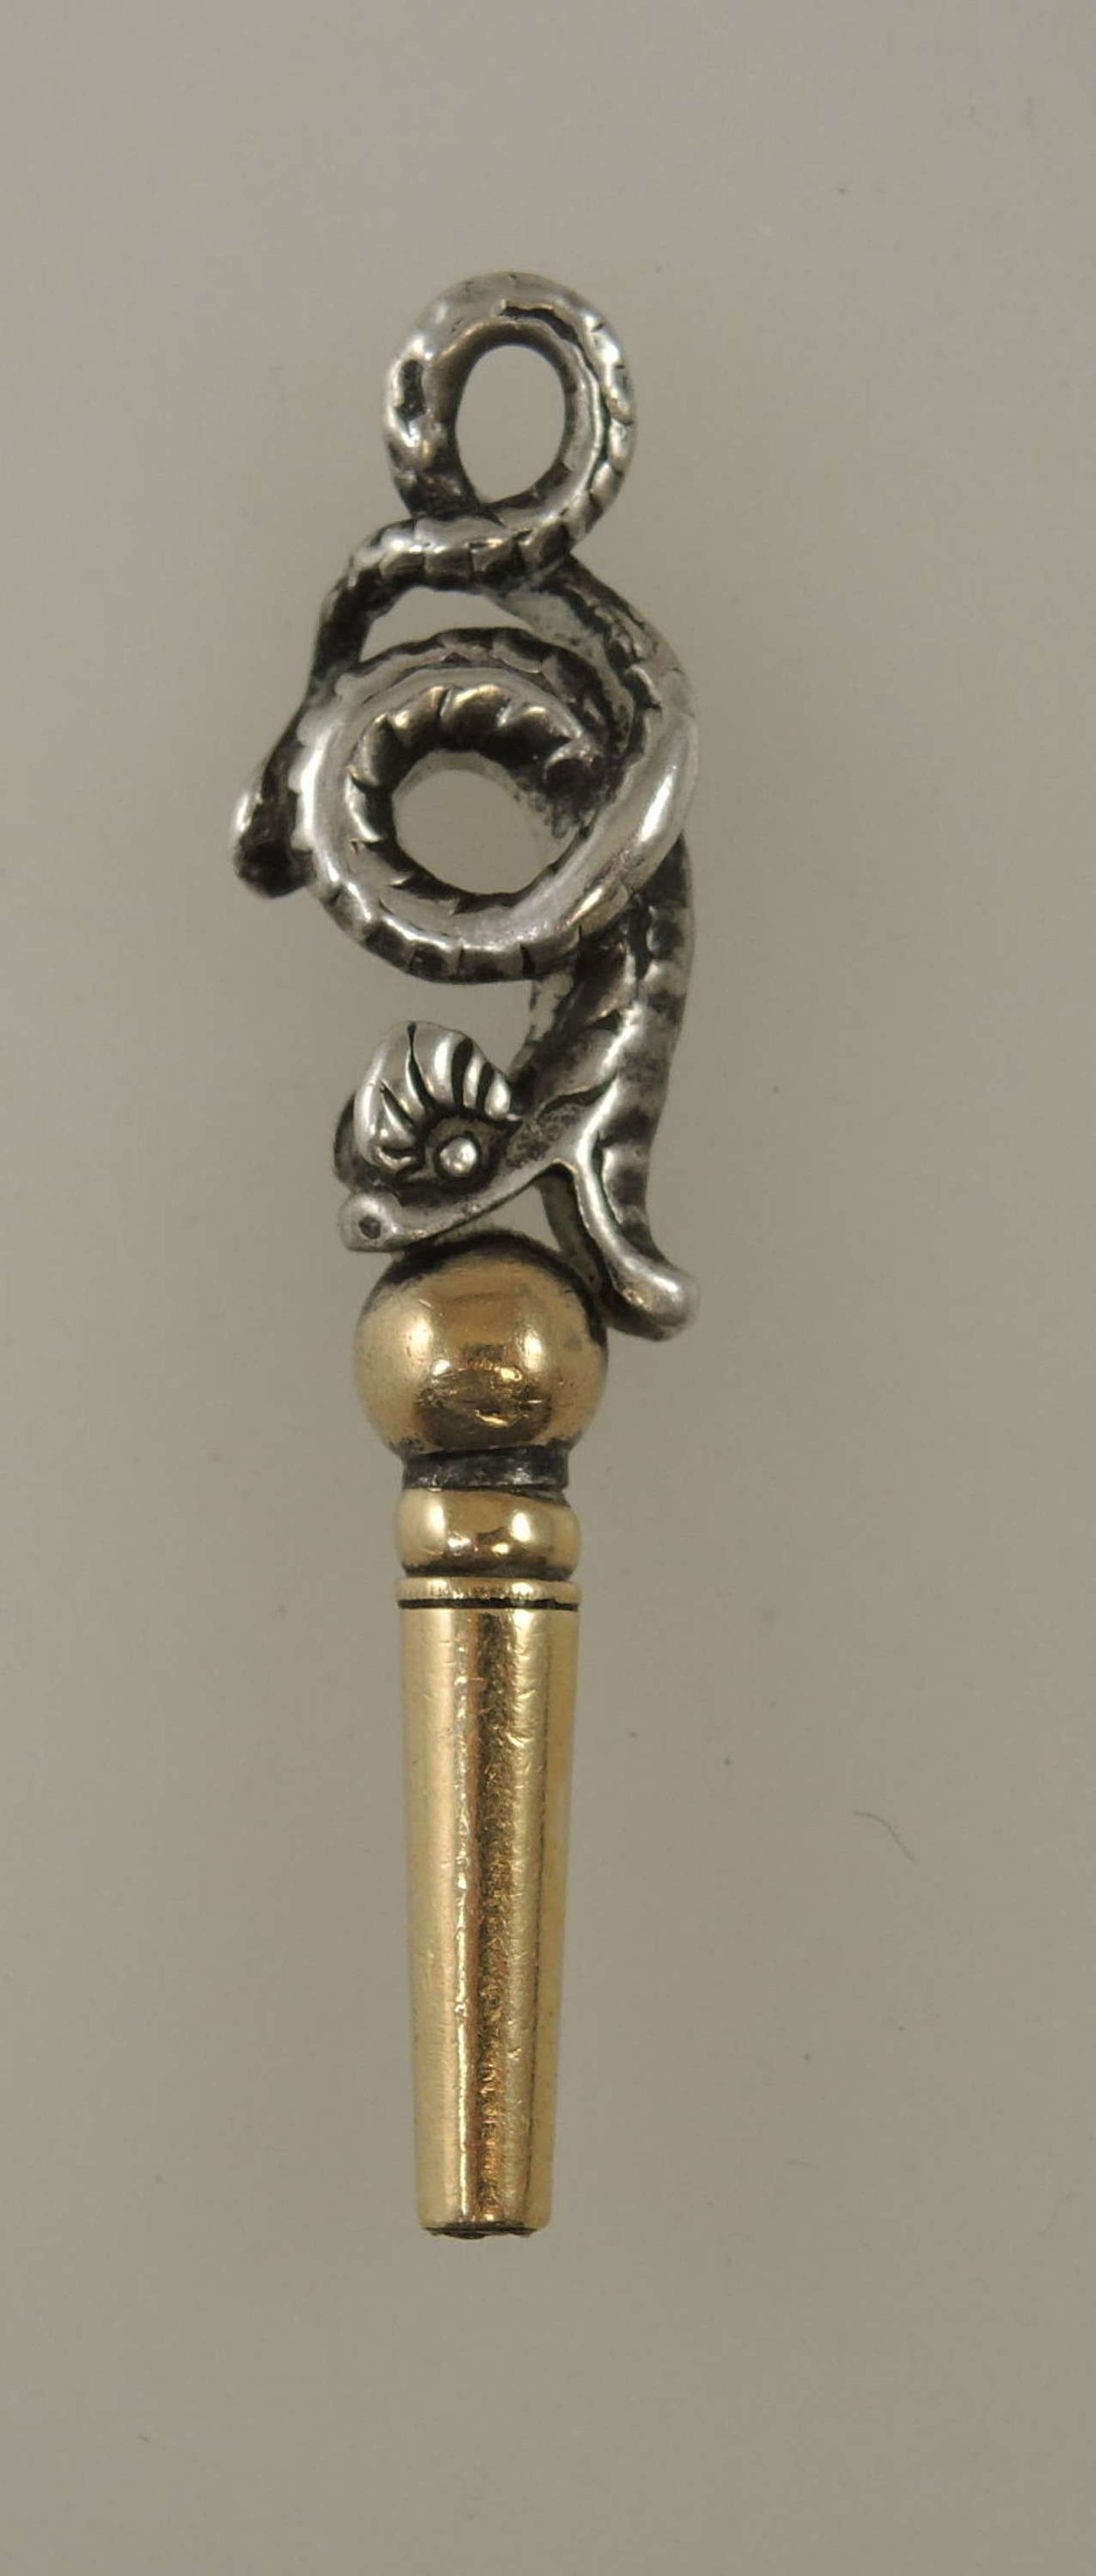 Gold and Silver Serpent pocket watch key c1850